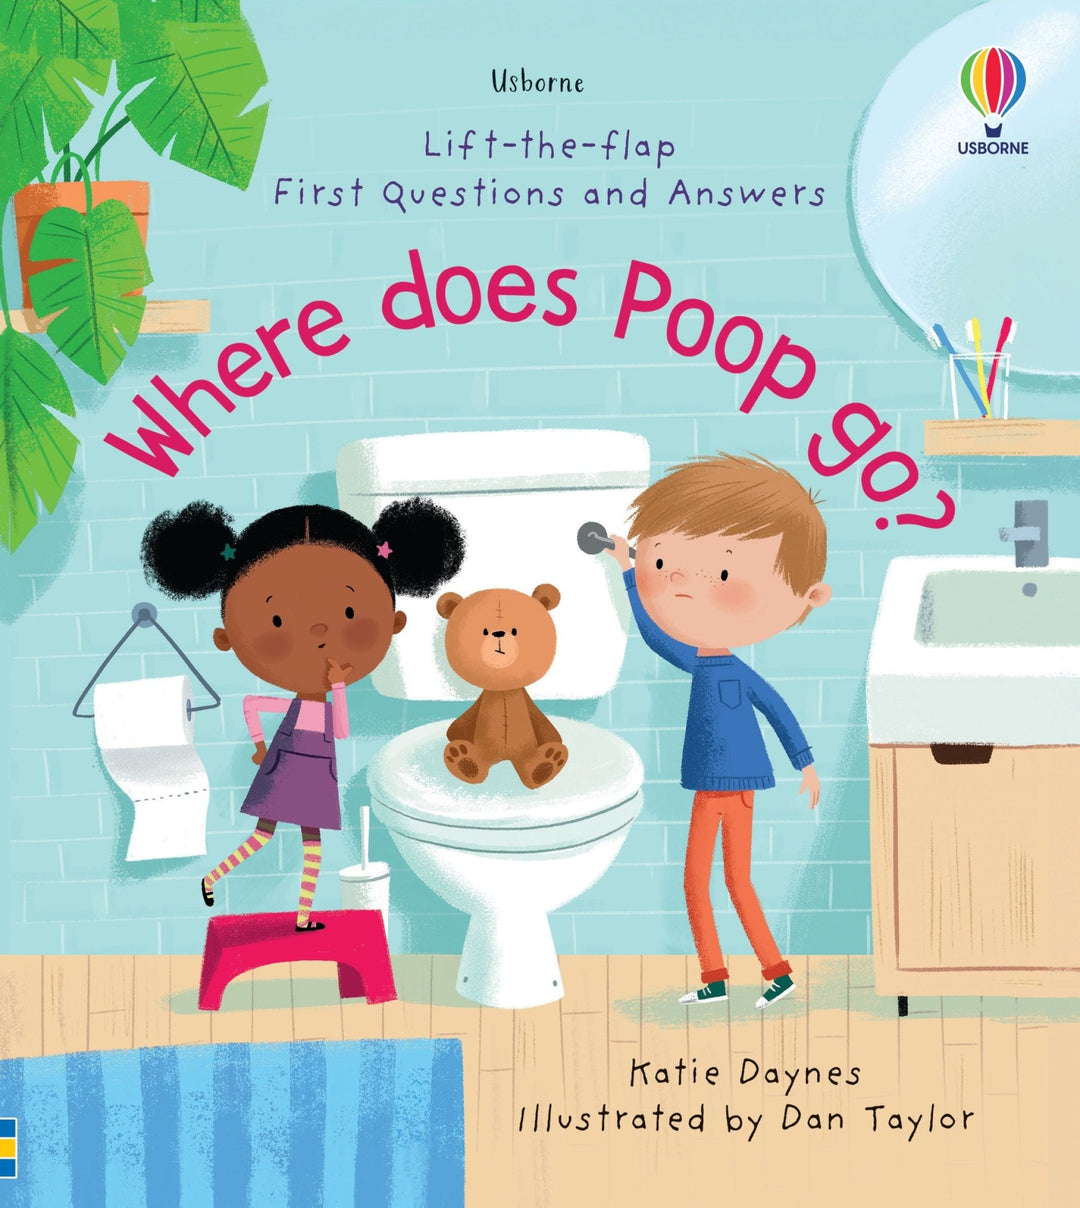 USBORNE First Questions and Answers: Where Does Poop Go?